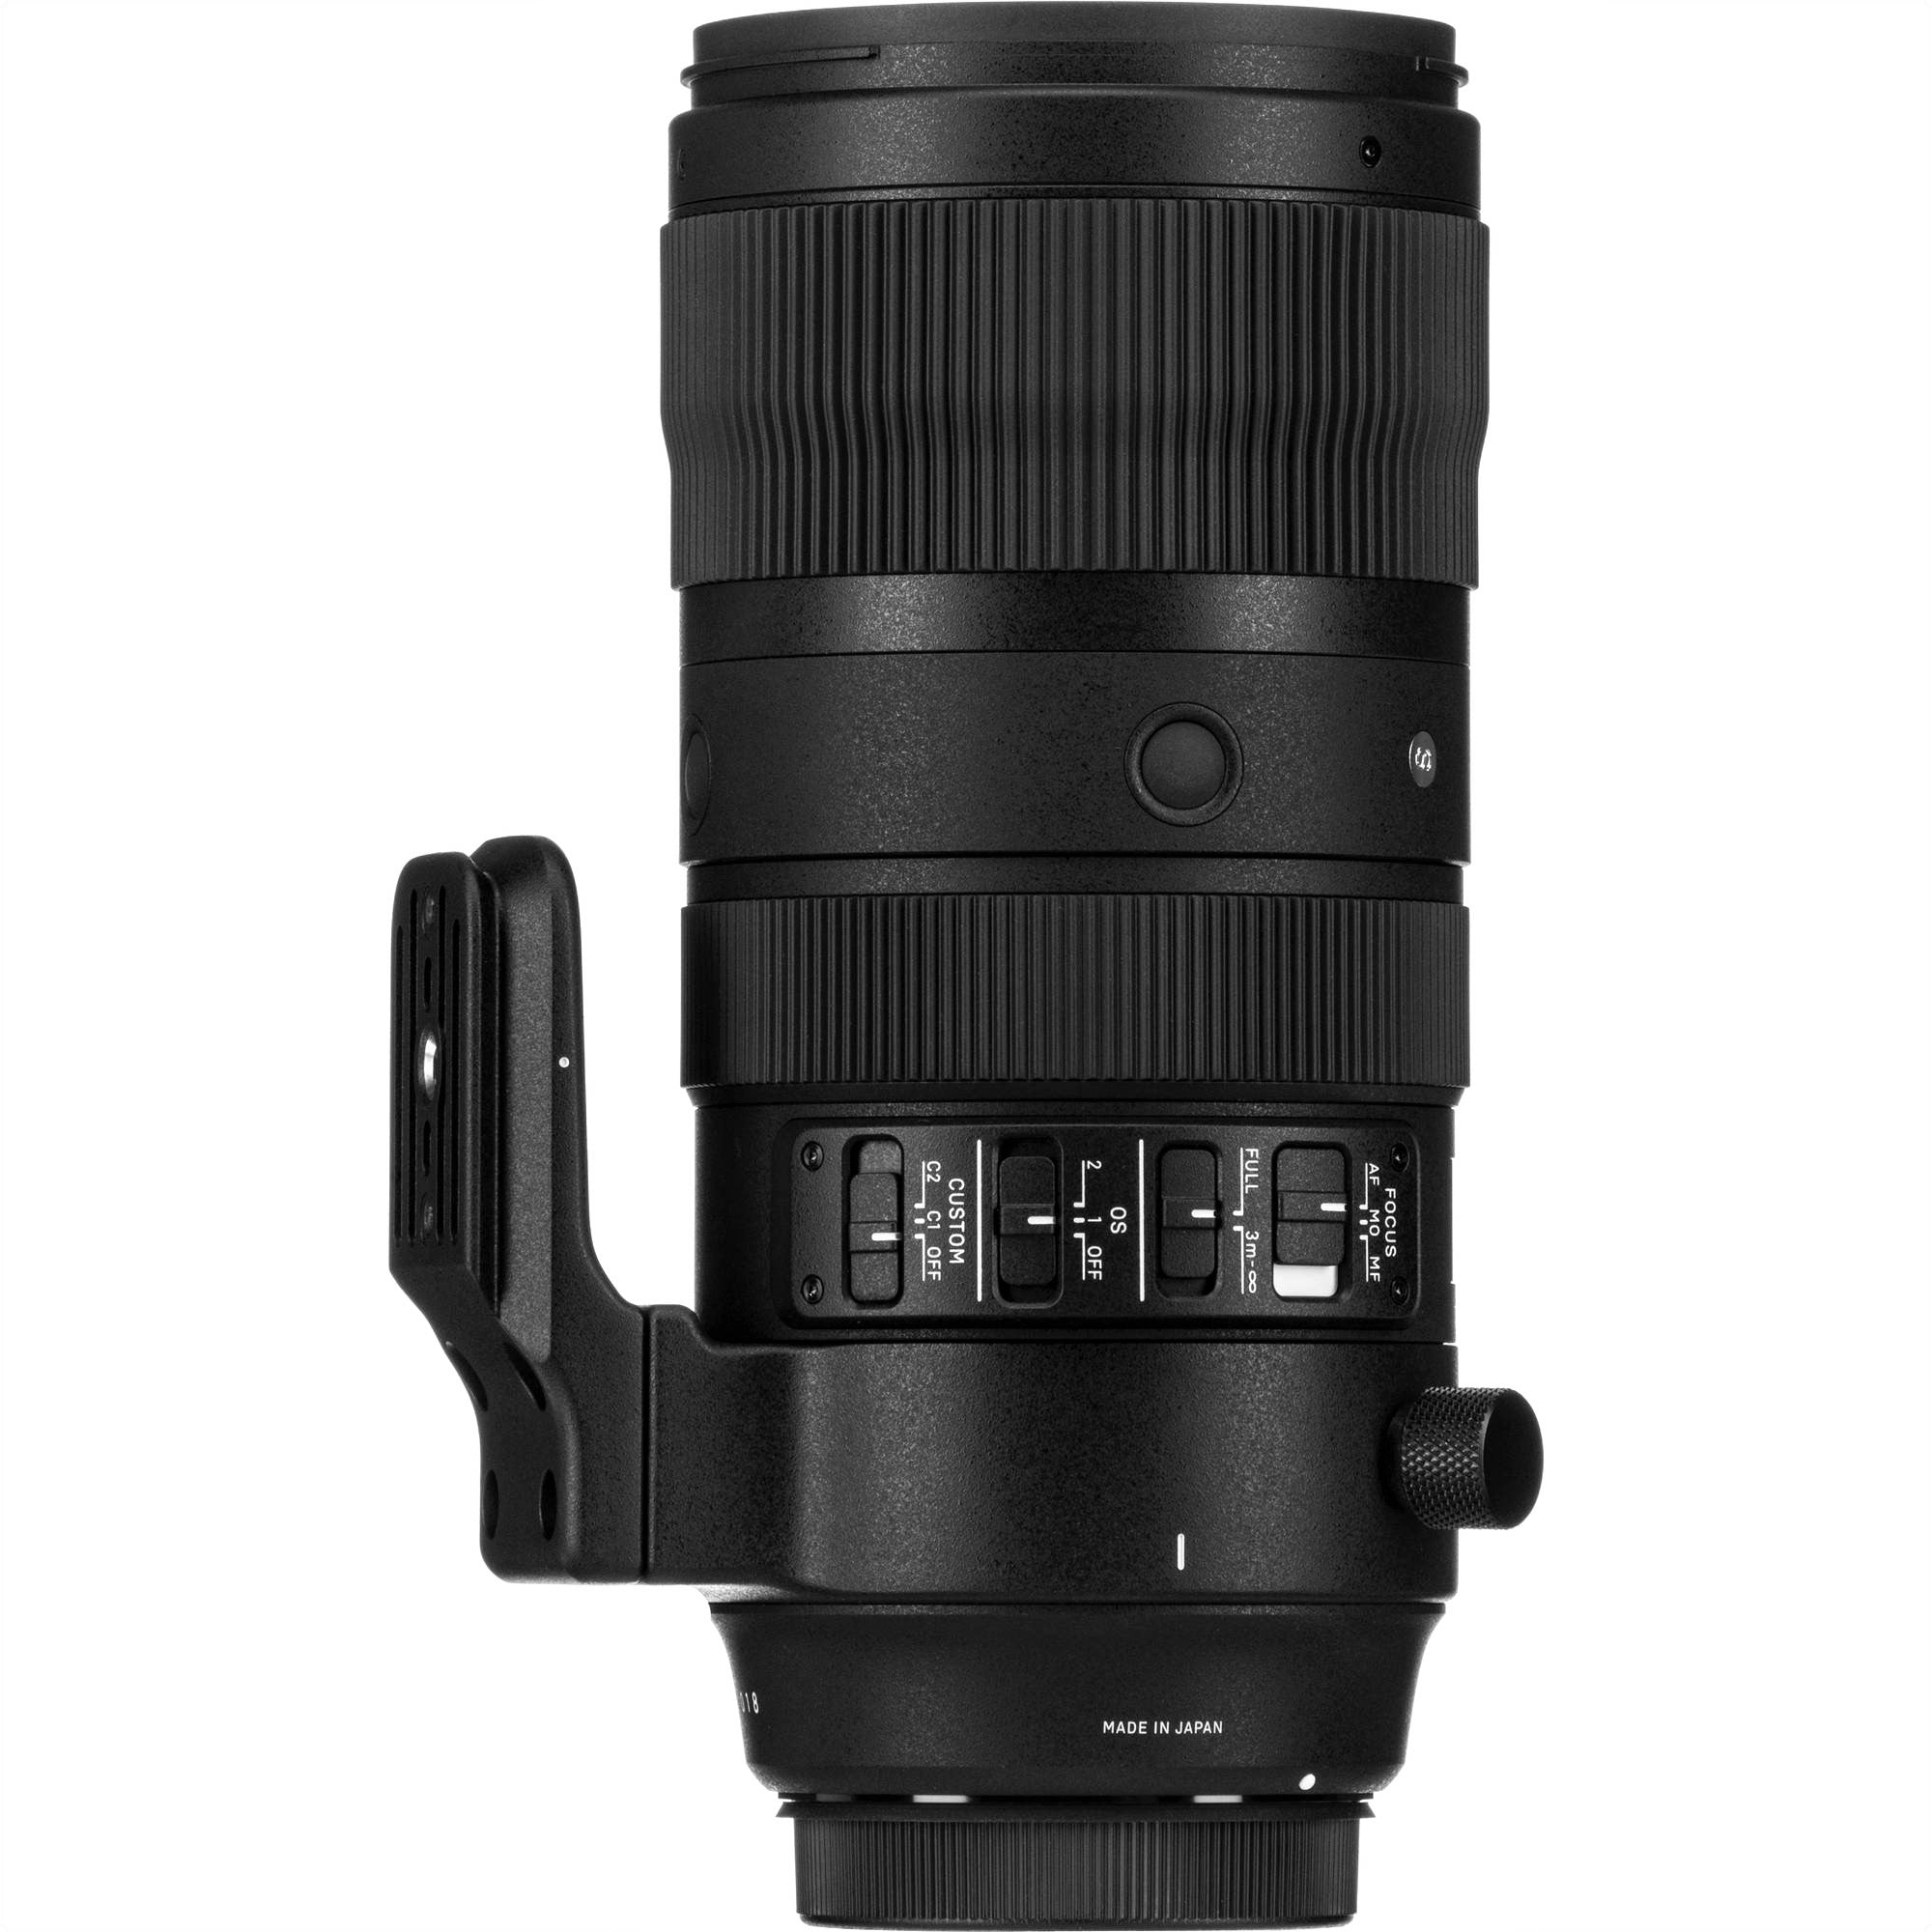 Sigma 70-200mm F2.8 DG OS HSM Sports Lens (Canon EF Mount) with Attached Tripod Socket on the Left Side